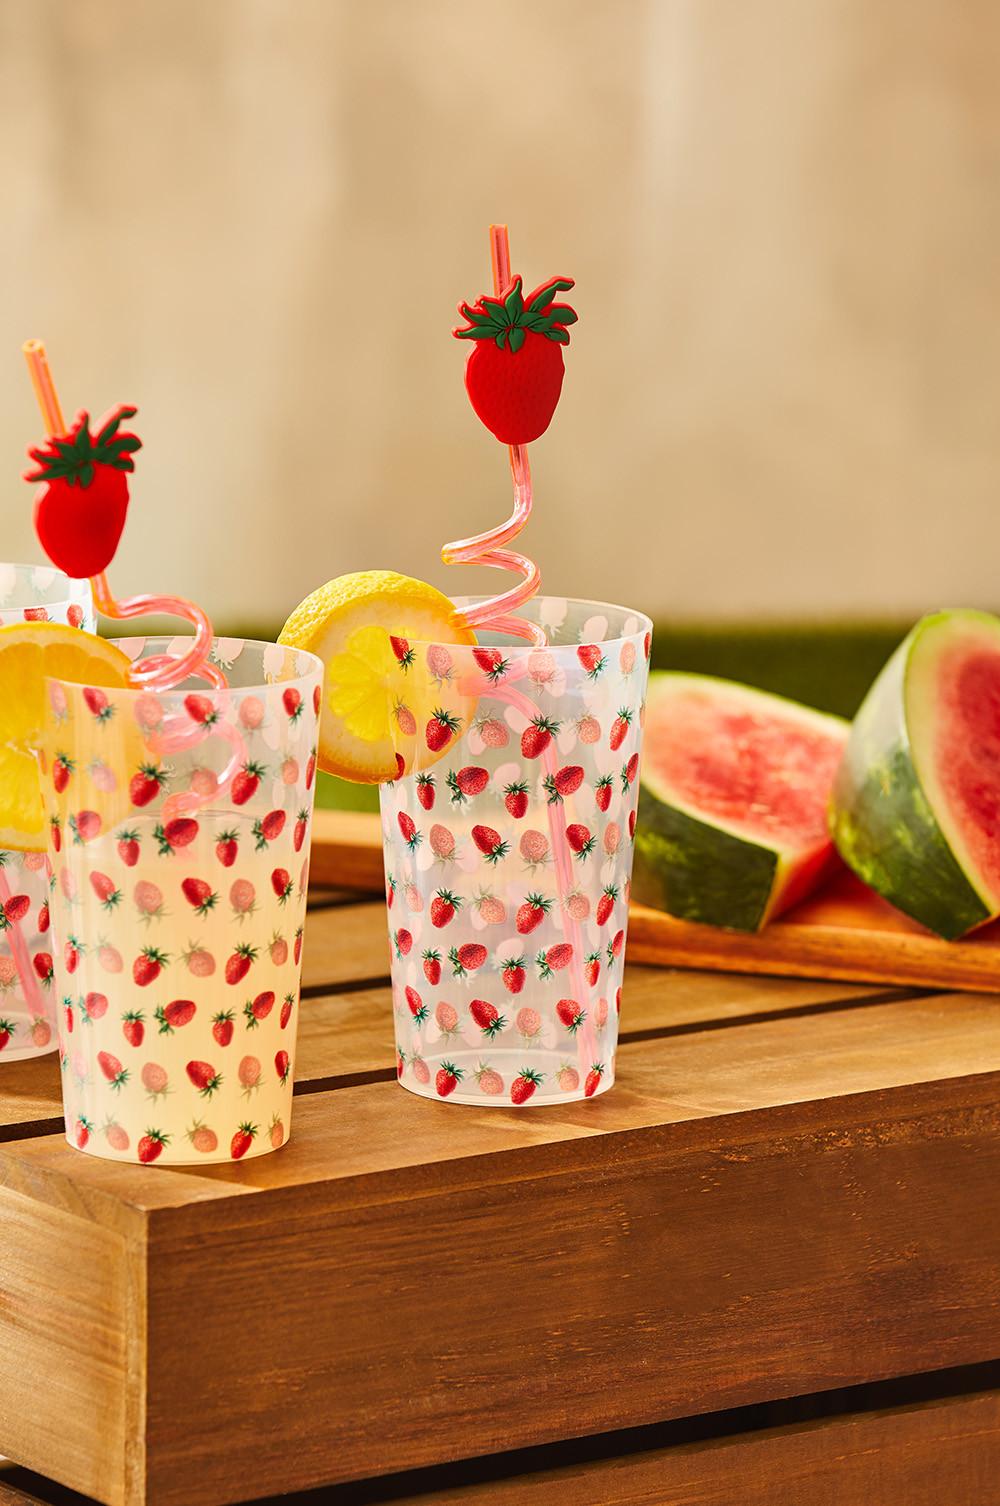 Plastic red reusable straws with strawberries on, in matching cups also with a strawberry pattern